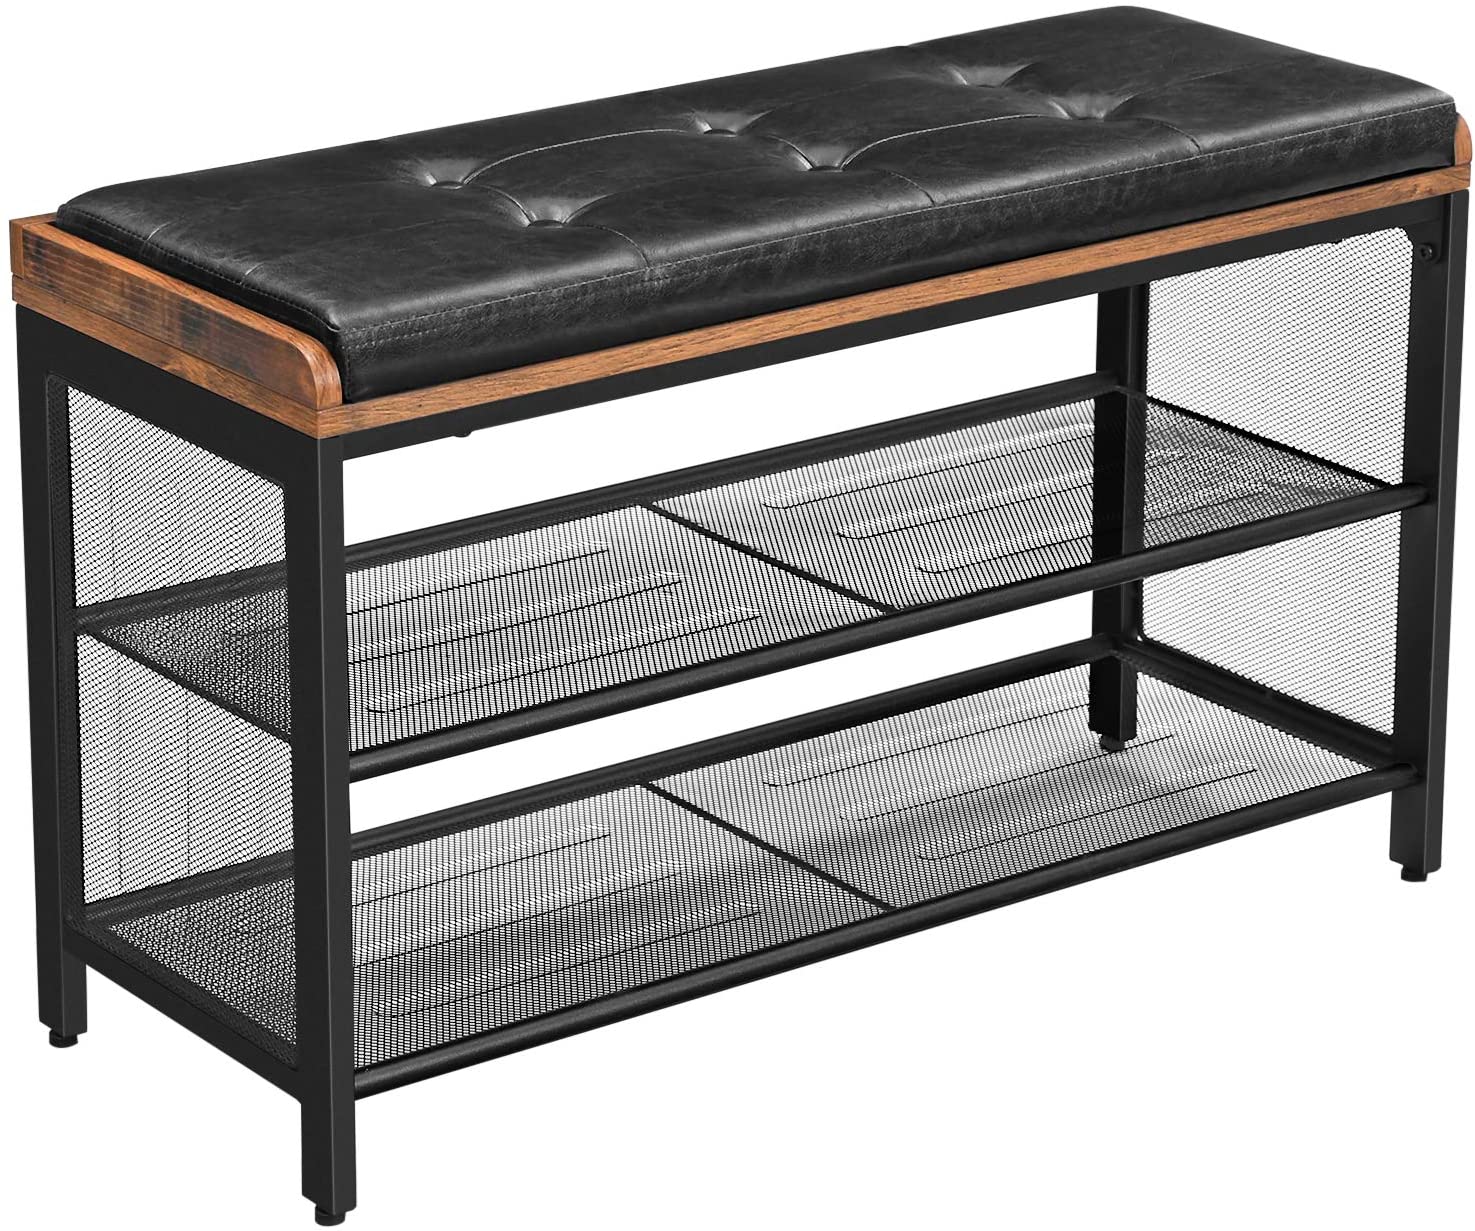 Benches: Padded Storage Bench with Mesh Shelf